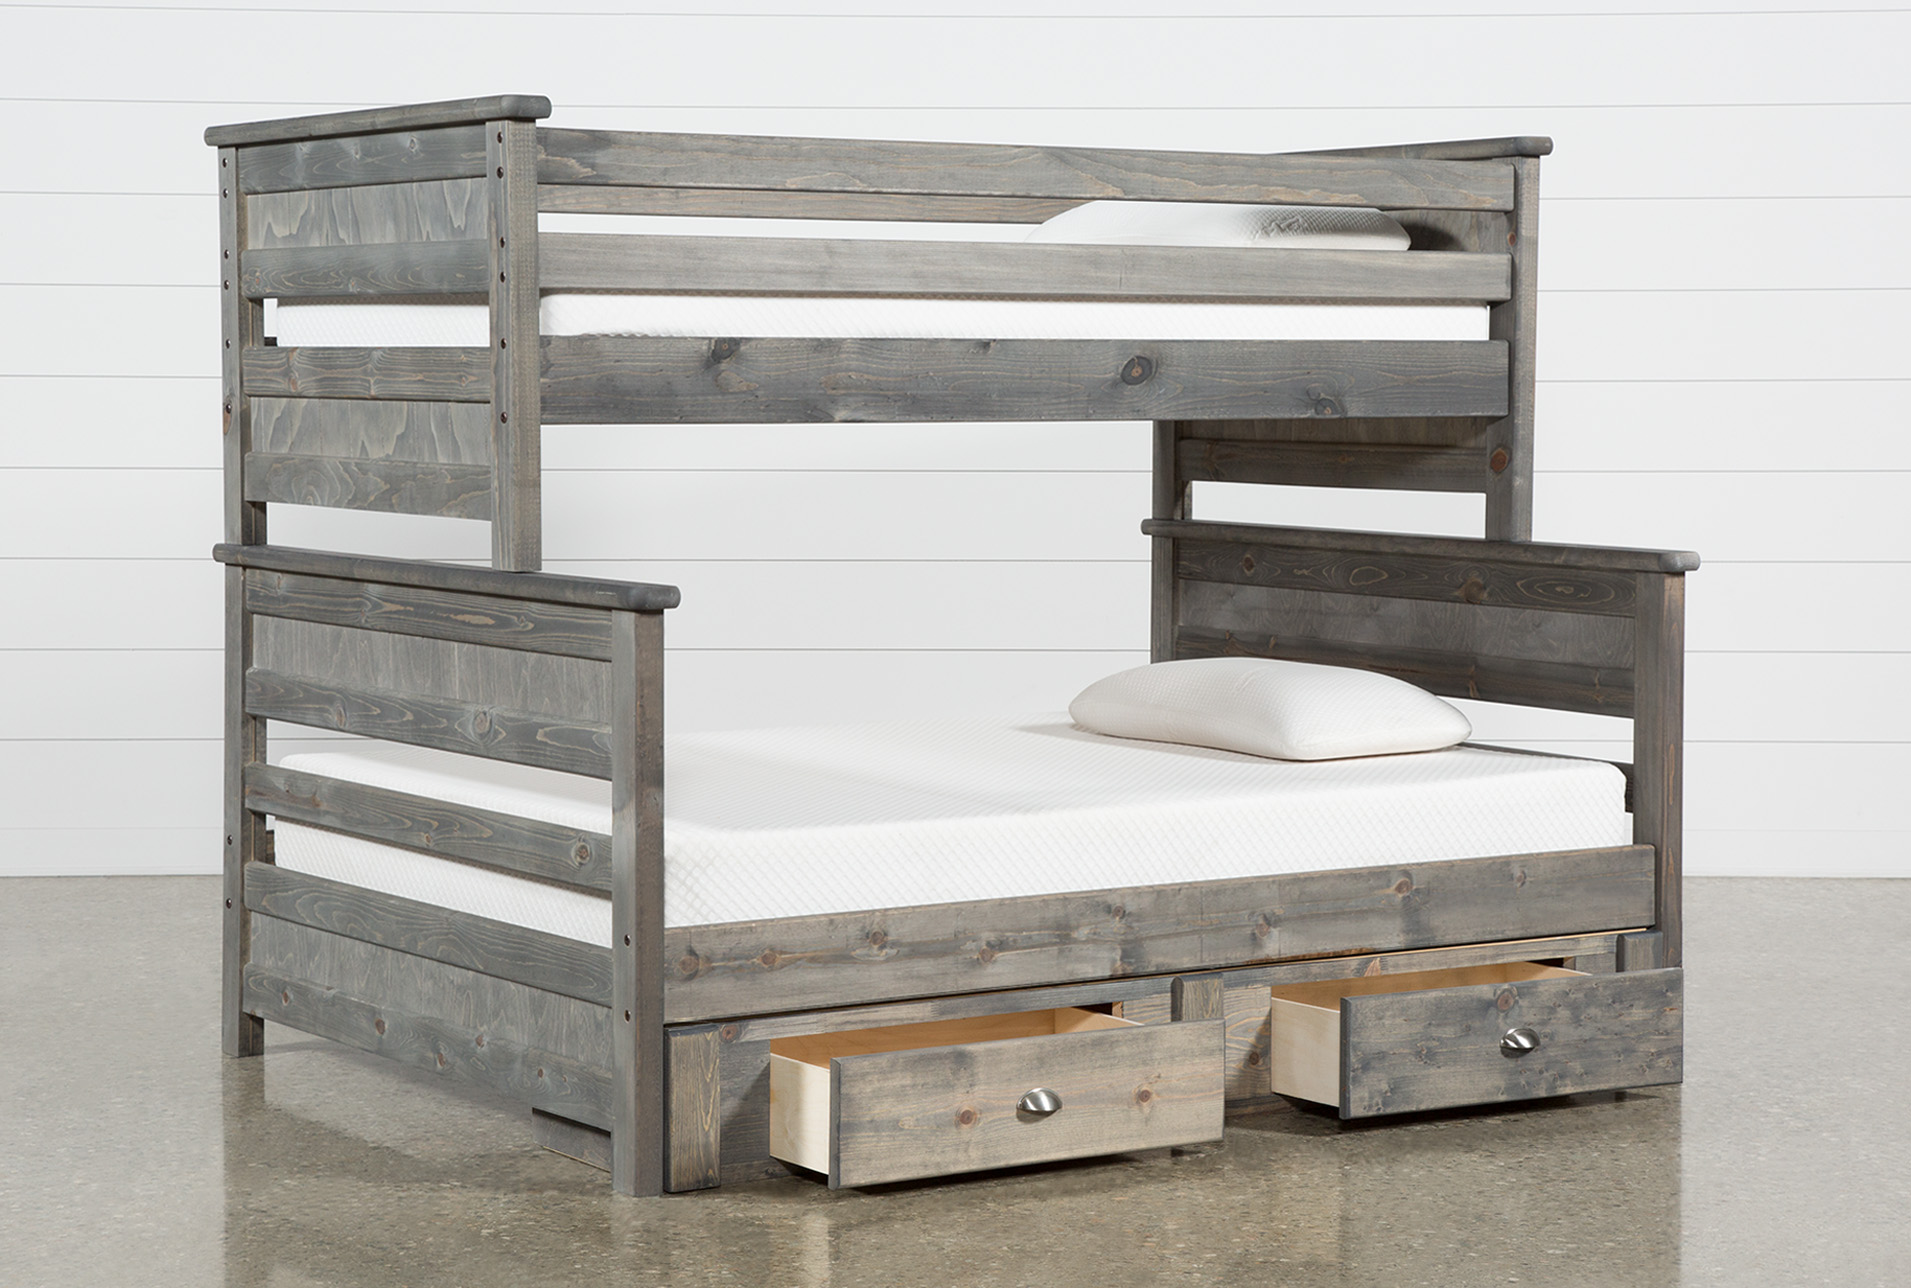 wood bunk beds twin over full